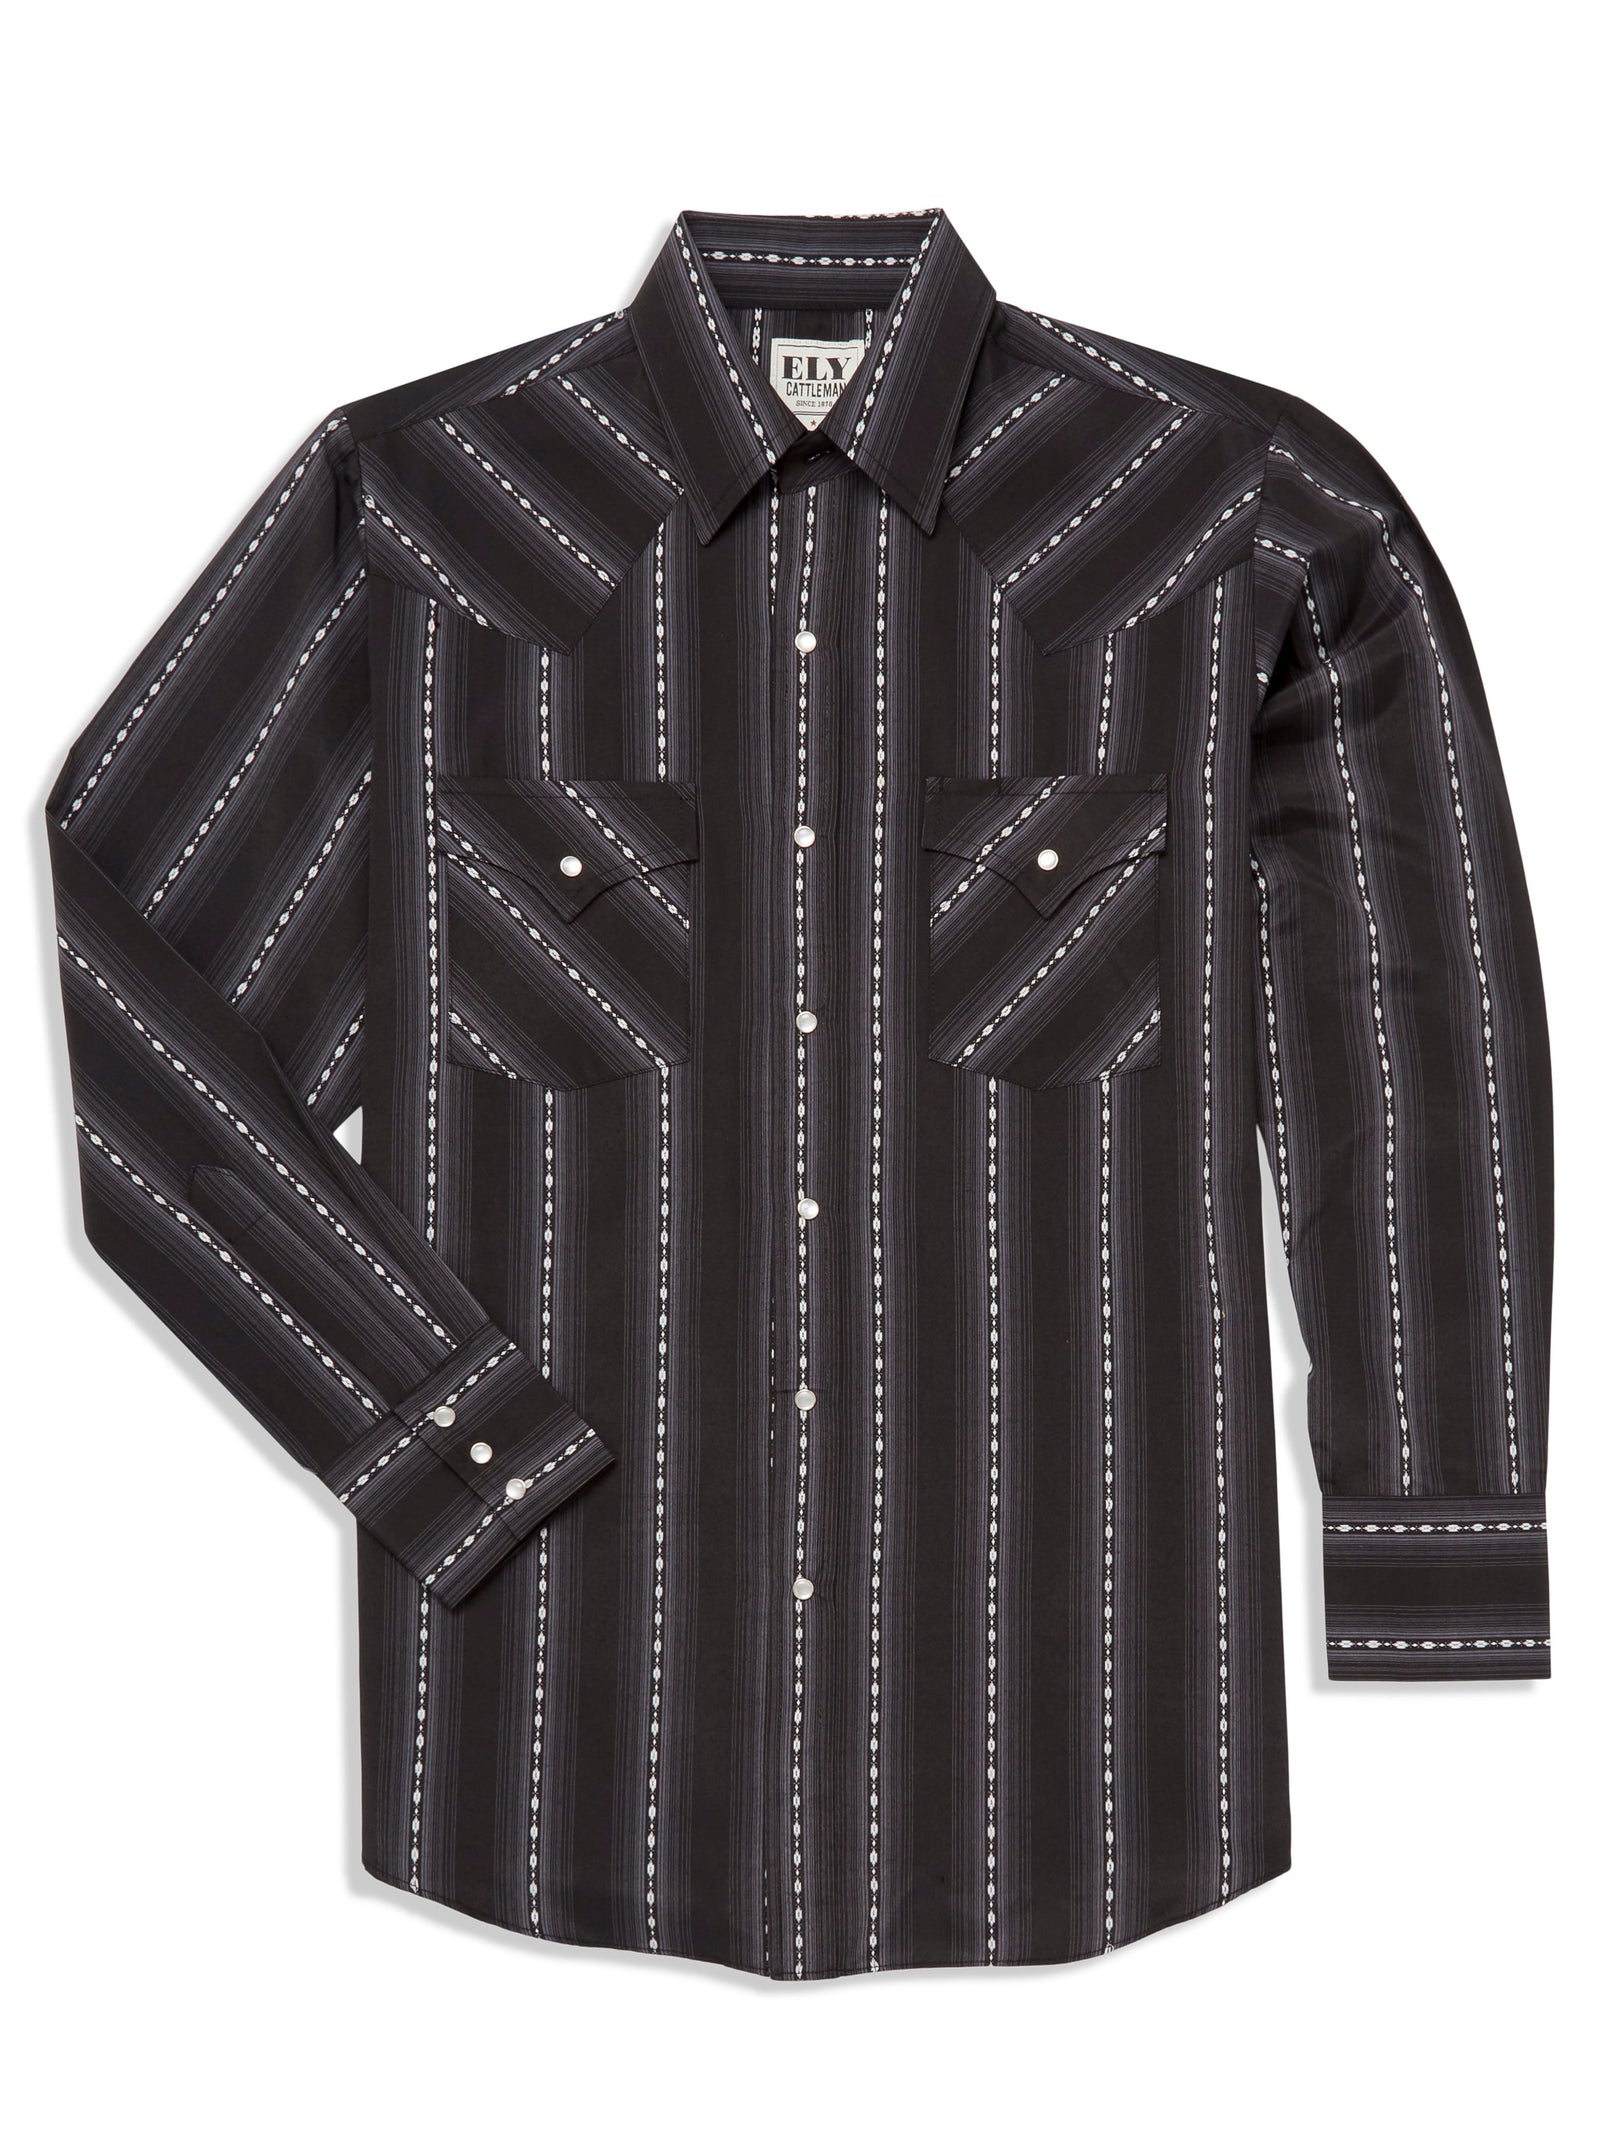 Ely Cattleman Men's Long-Sleeve Snap-Front Rose Embroidery Western Shirt, Black